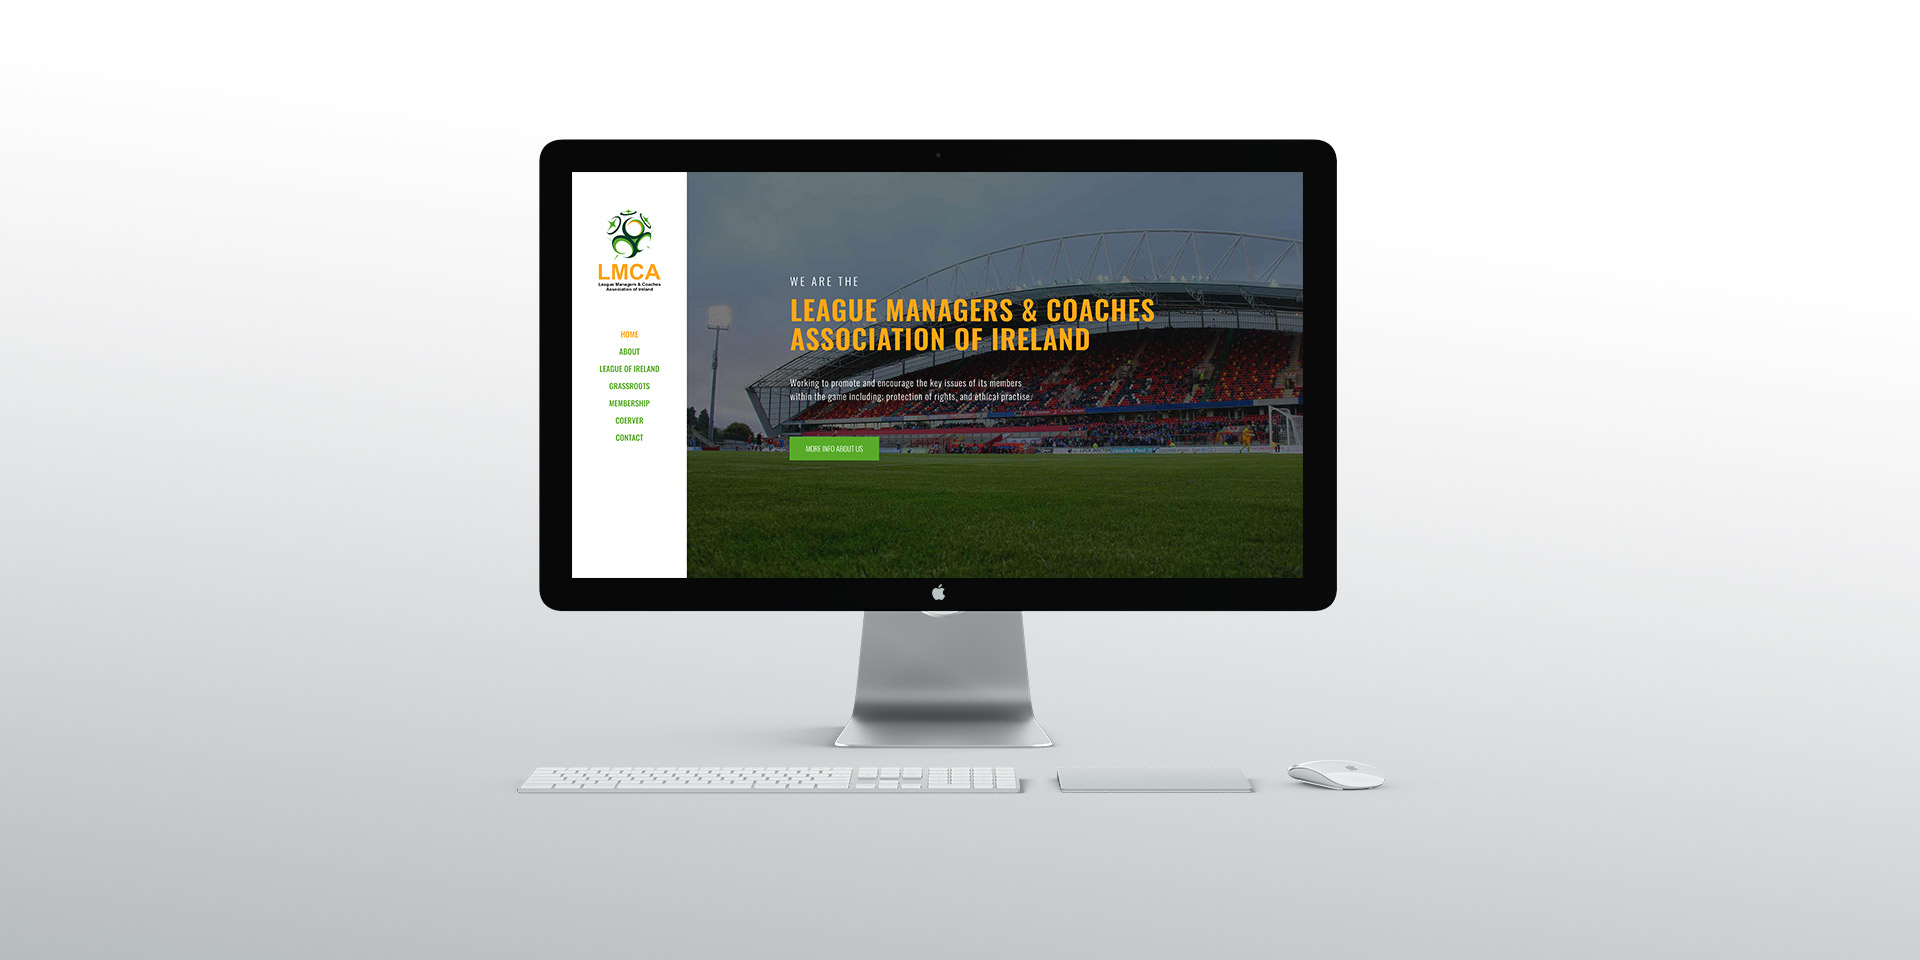 League Managers & Coaches Association of Ireland